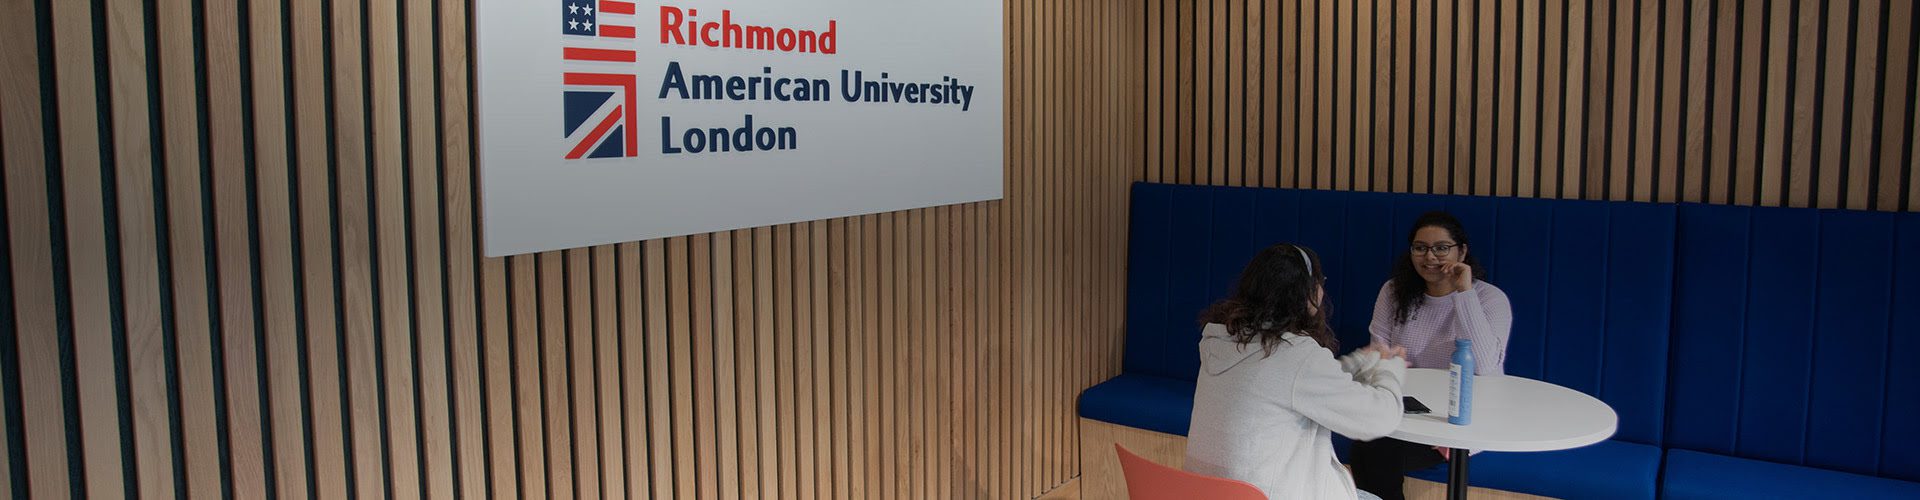 Two people are seated opposite each other at a white table inside a modern room with wooden slats and a sign for 玩偶姐姐 American University London.